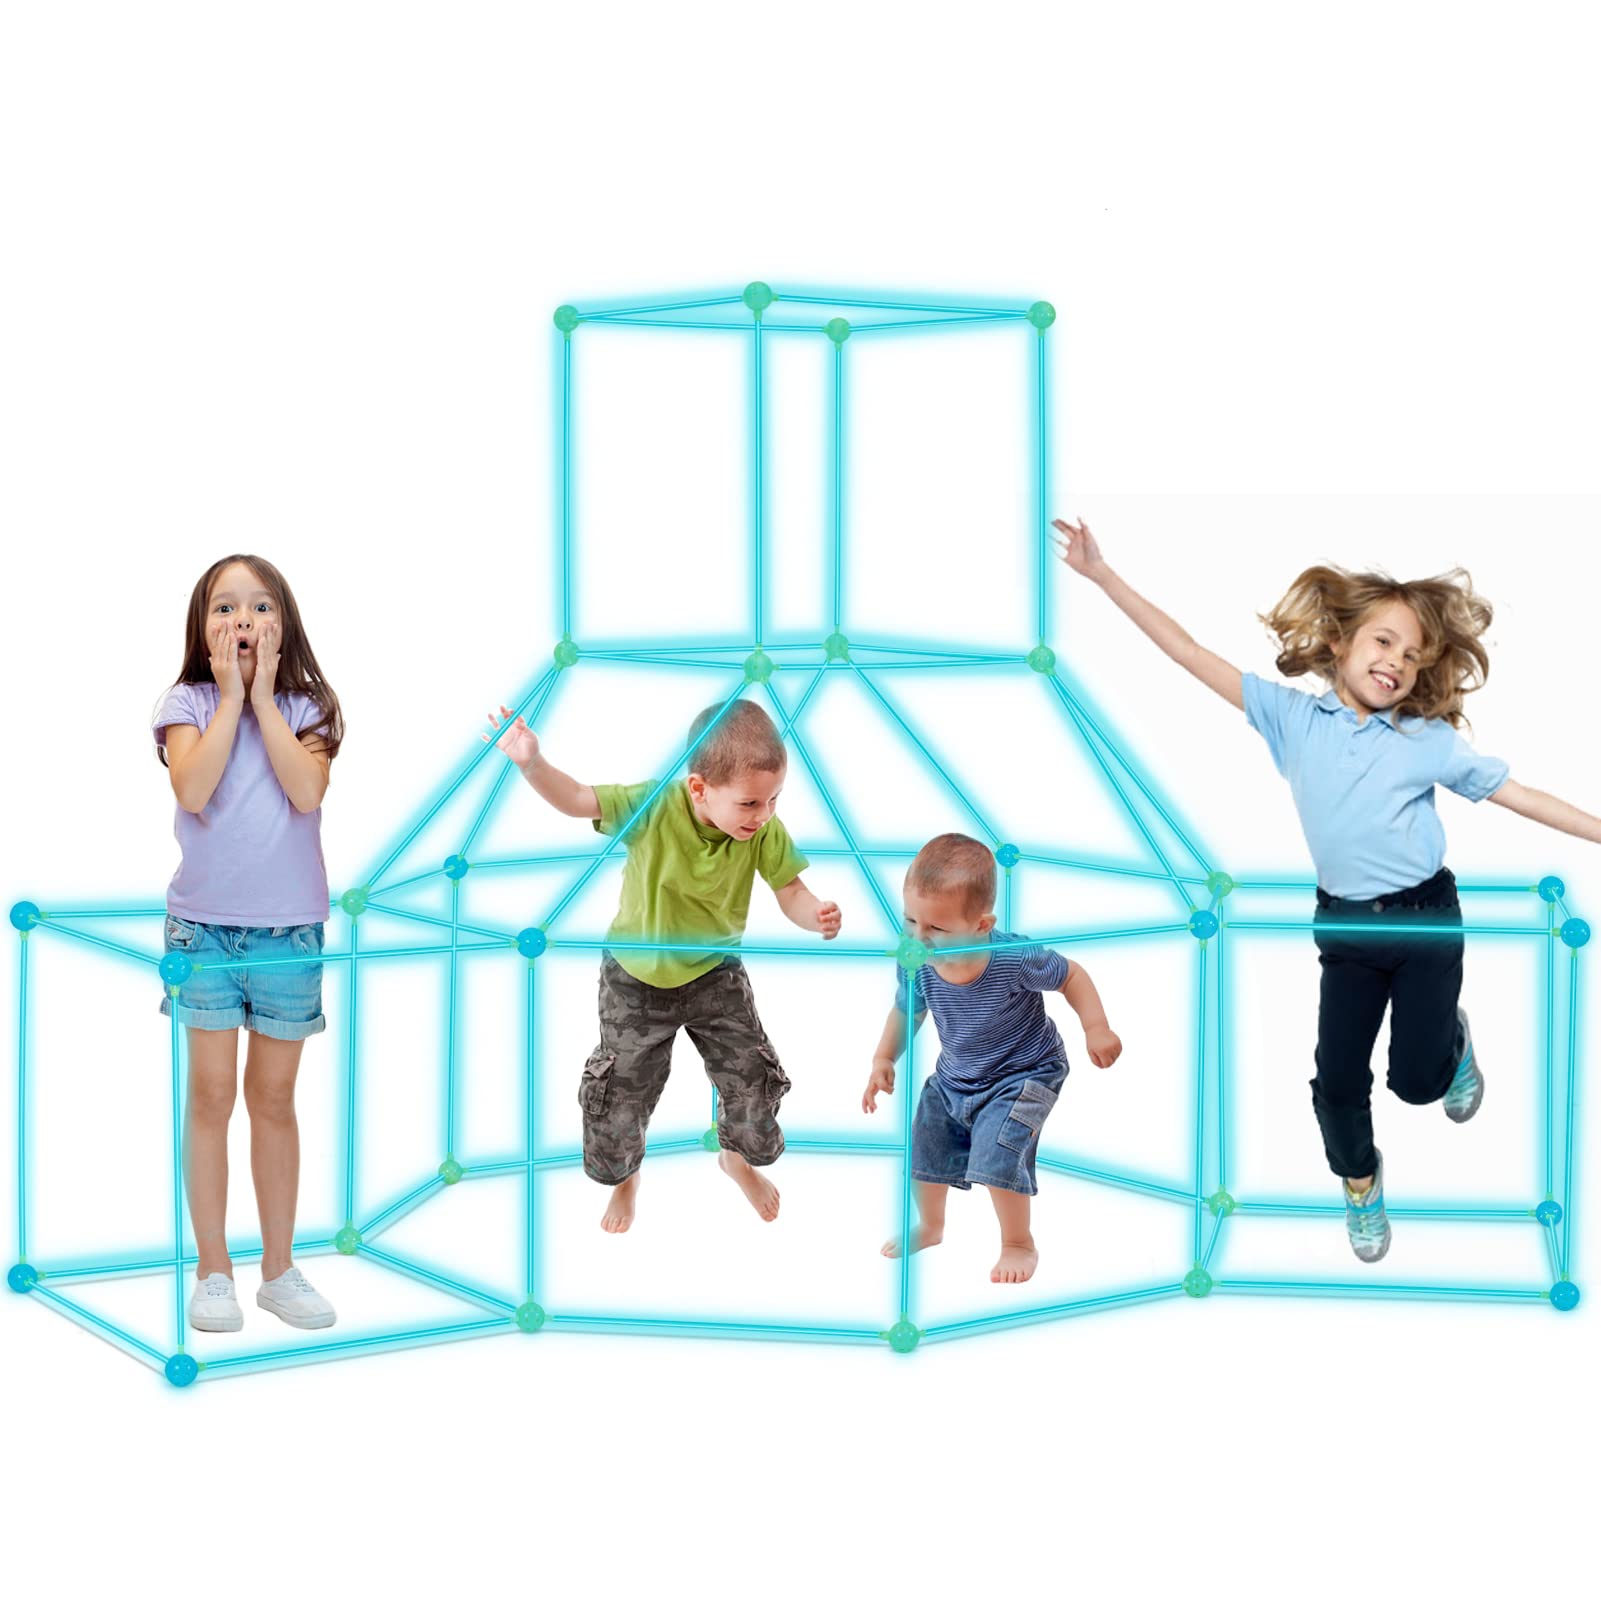 Obuby Kids Construction Fort Building Kit 120 Pieces Ultimate